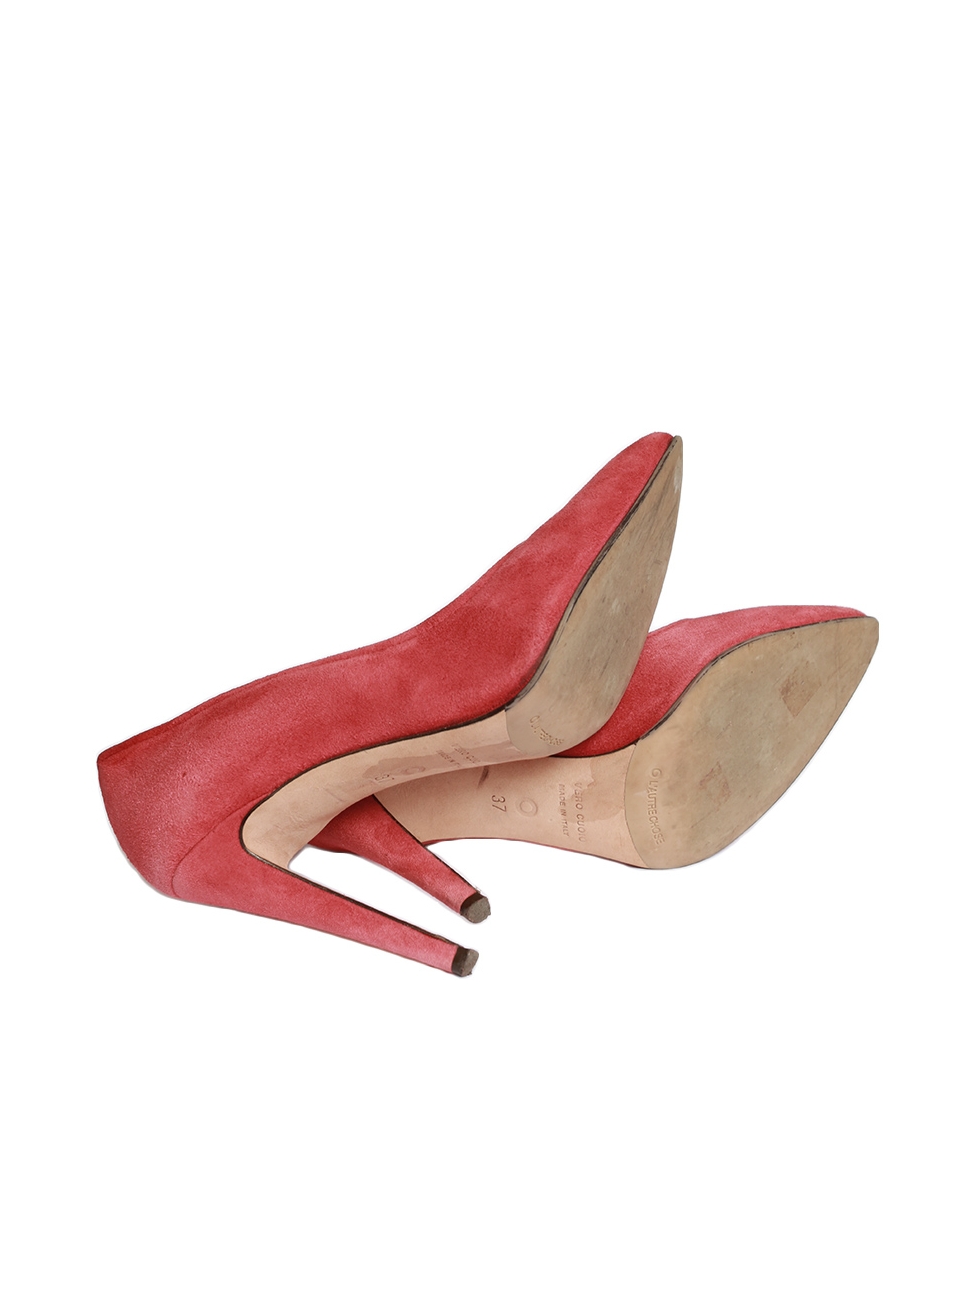 LOUIS VUITTON PUMPS LEATHER SUEDE SHOES HEELS Open Toe Coral Red